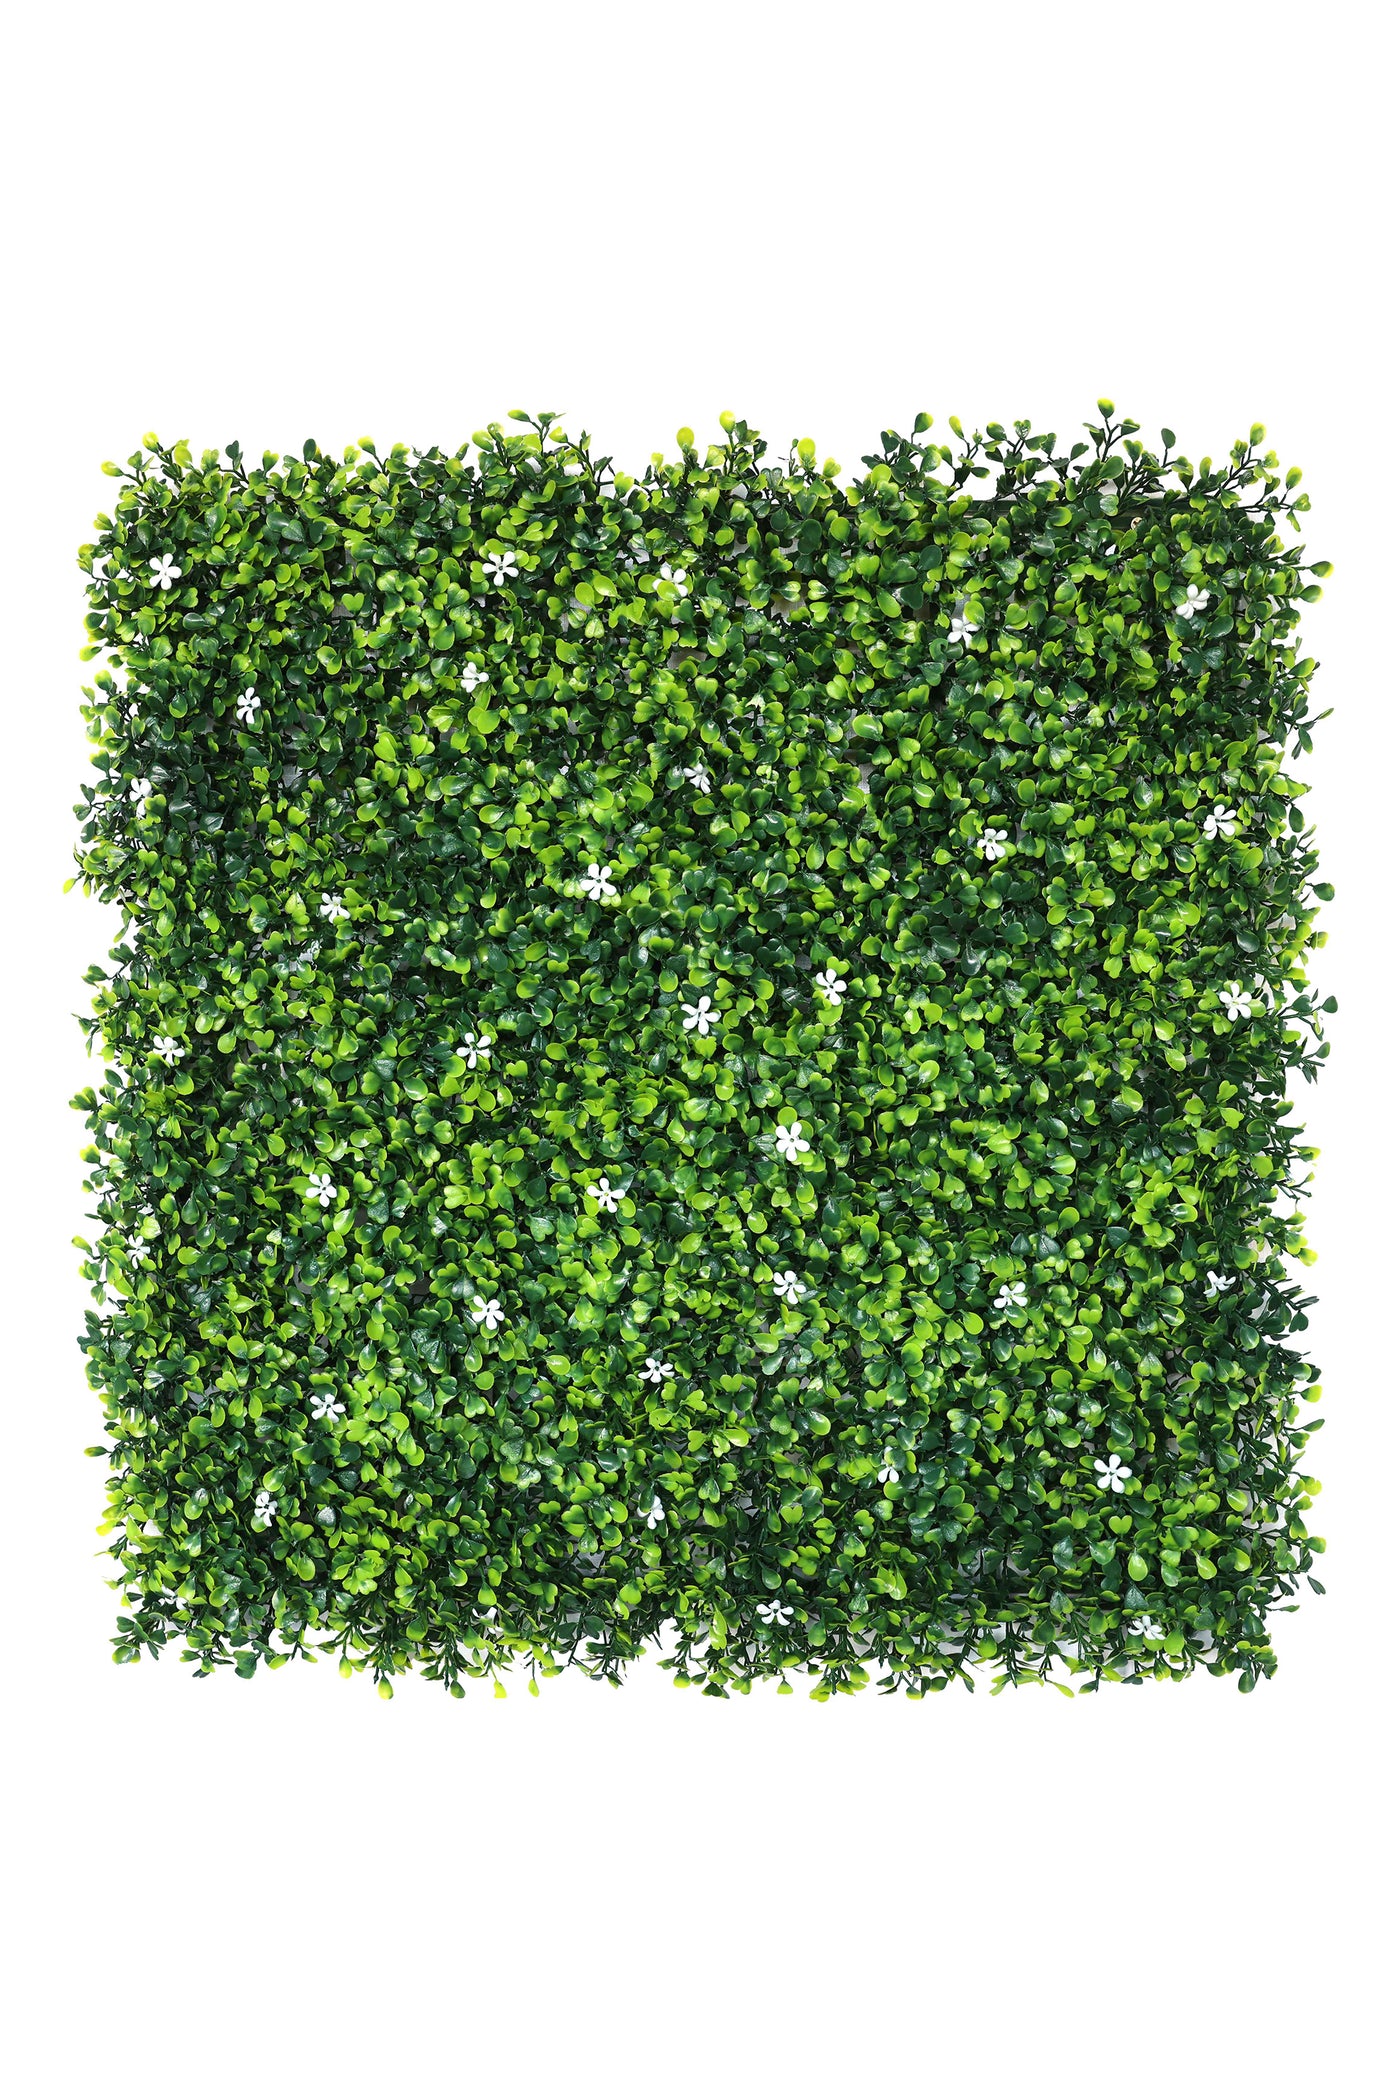 White Flowers With Small Lush Green Leaves Artificial Vertical Garden Wall Tile (Pack of 1)